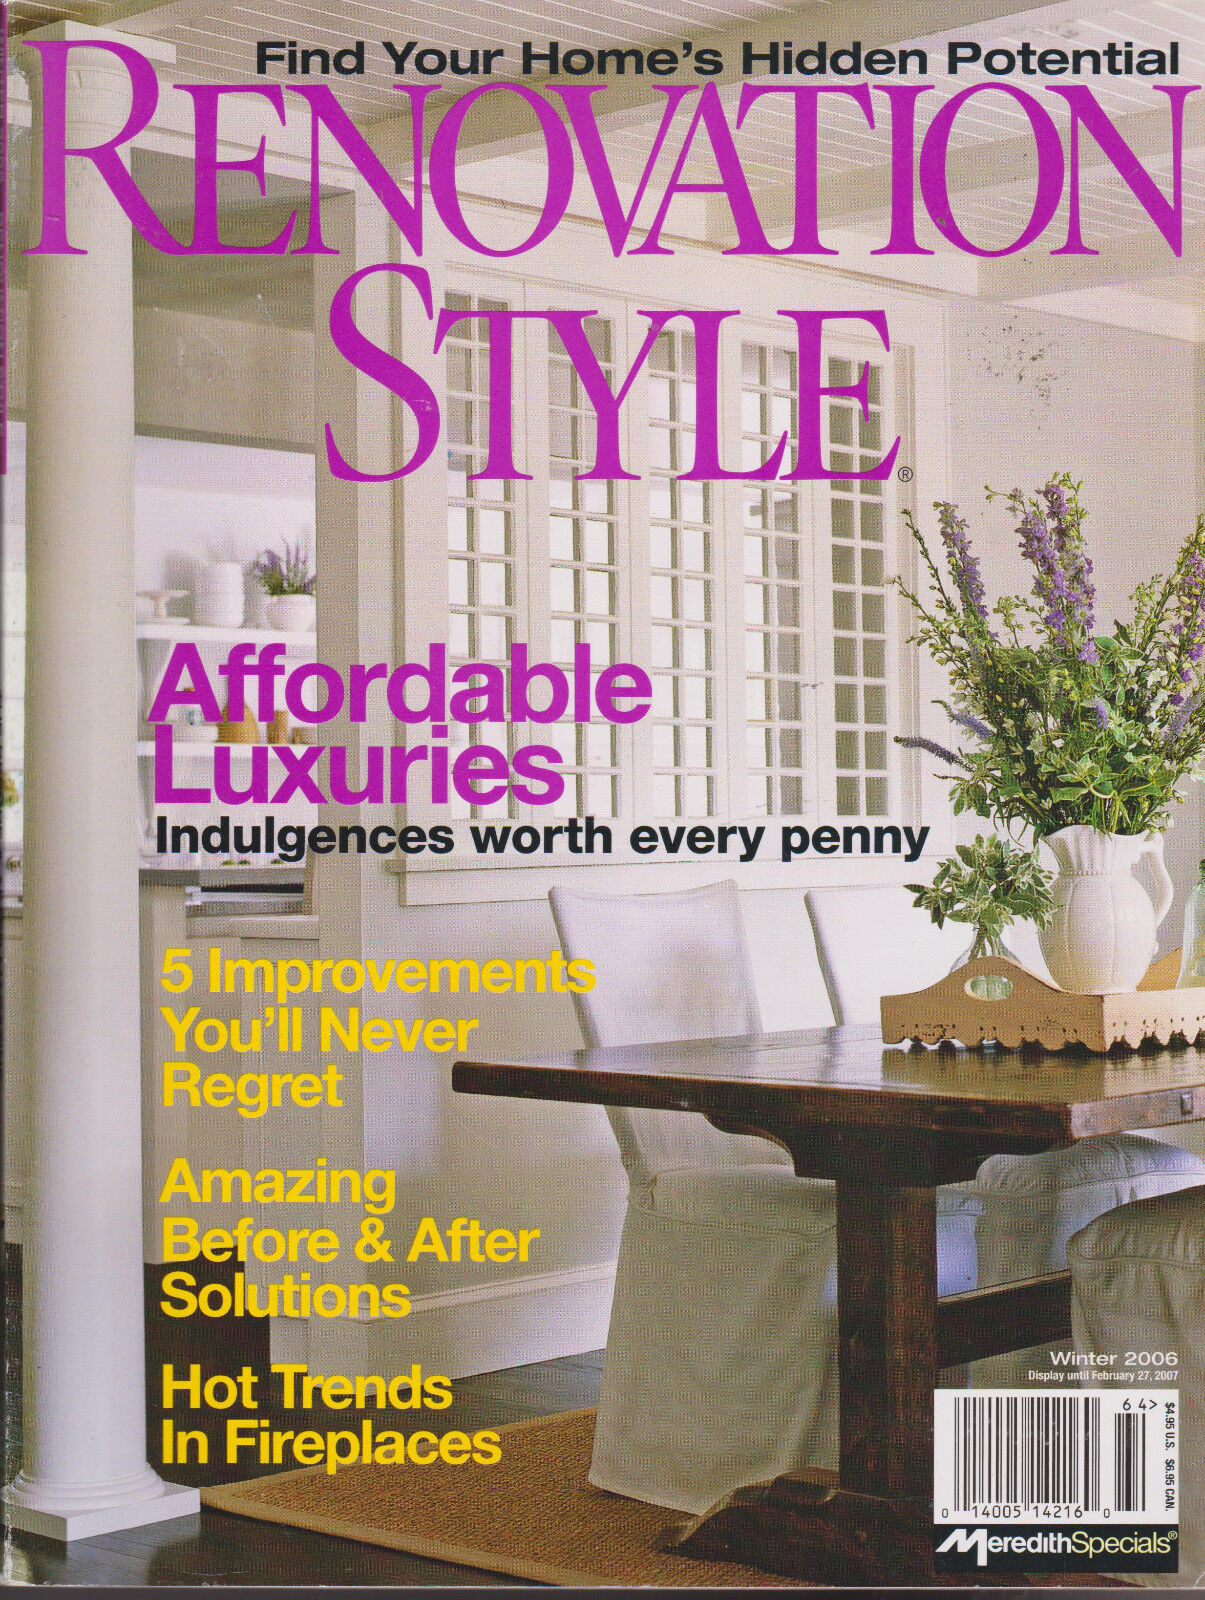 RENOVATION STYLE MAGAZINE WINTER 2006 *AFFORDABLE LUXURIES*